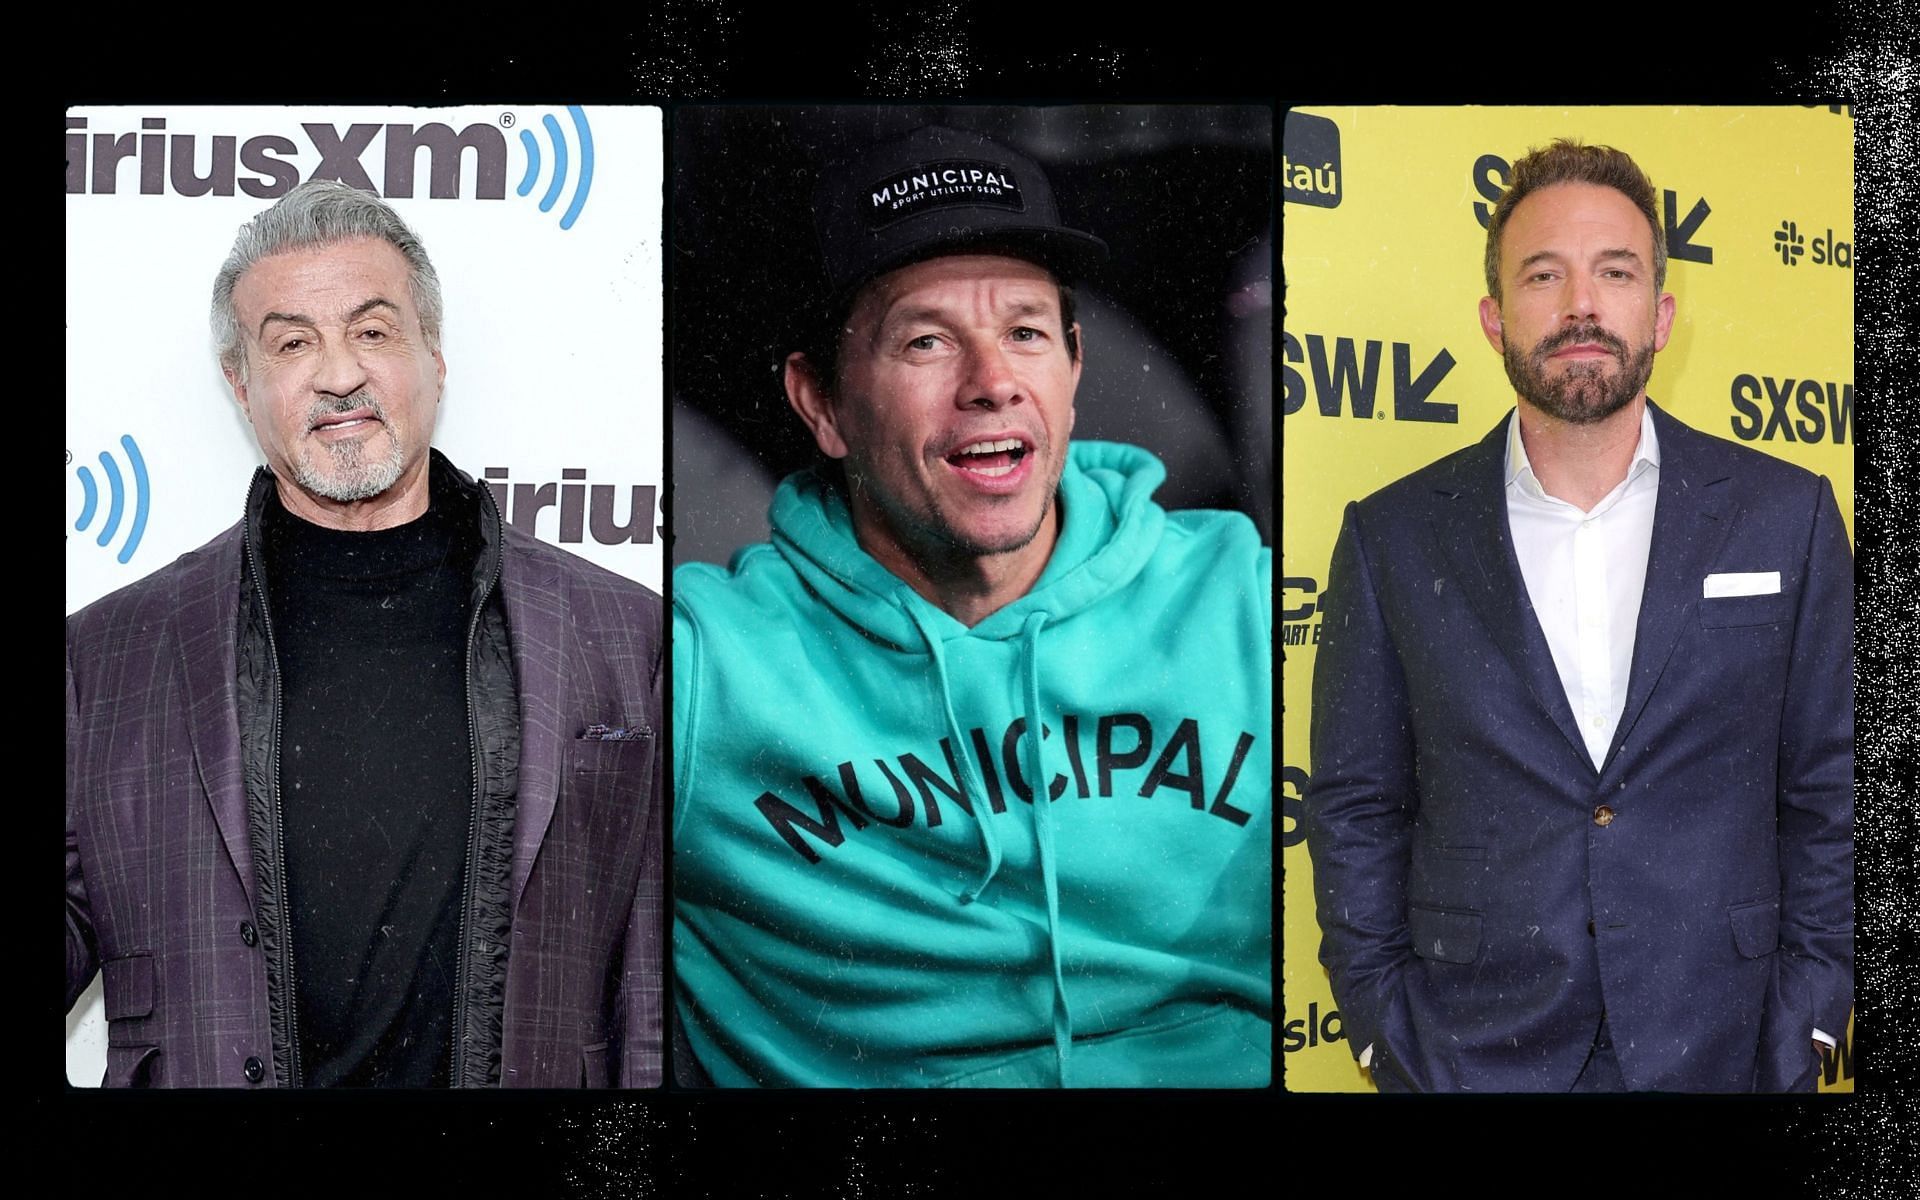 Here is how much stake Mark Wahlberg, Sylvester Stallone, Ben Affleck, and others hold in the company. [Image credits: Getty Images]